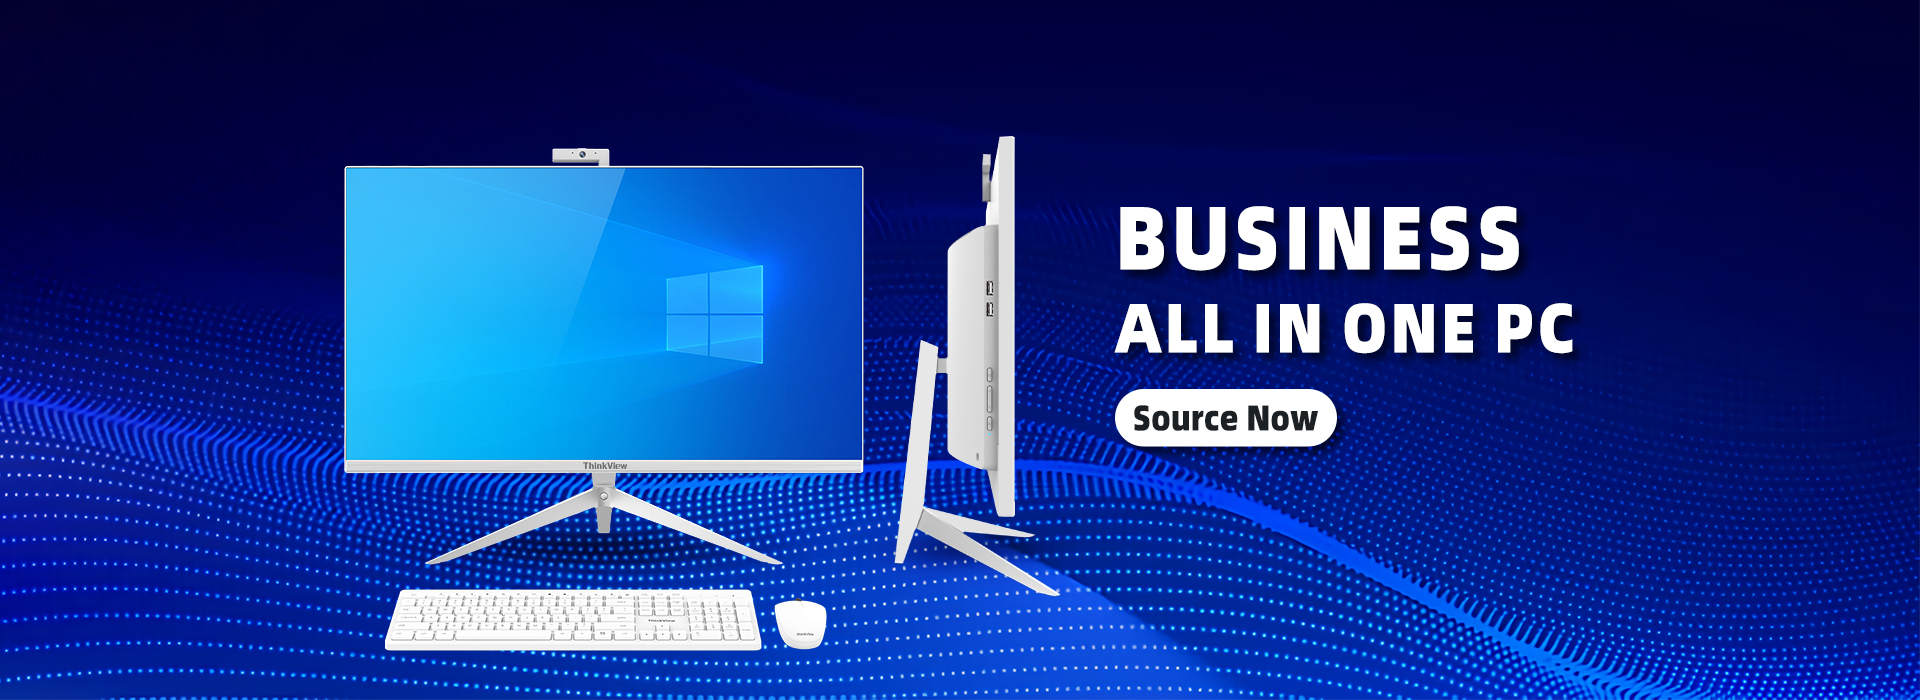 Business All in one PC